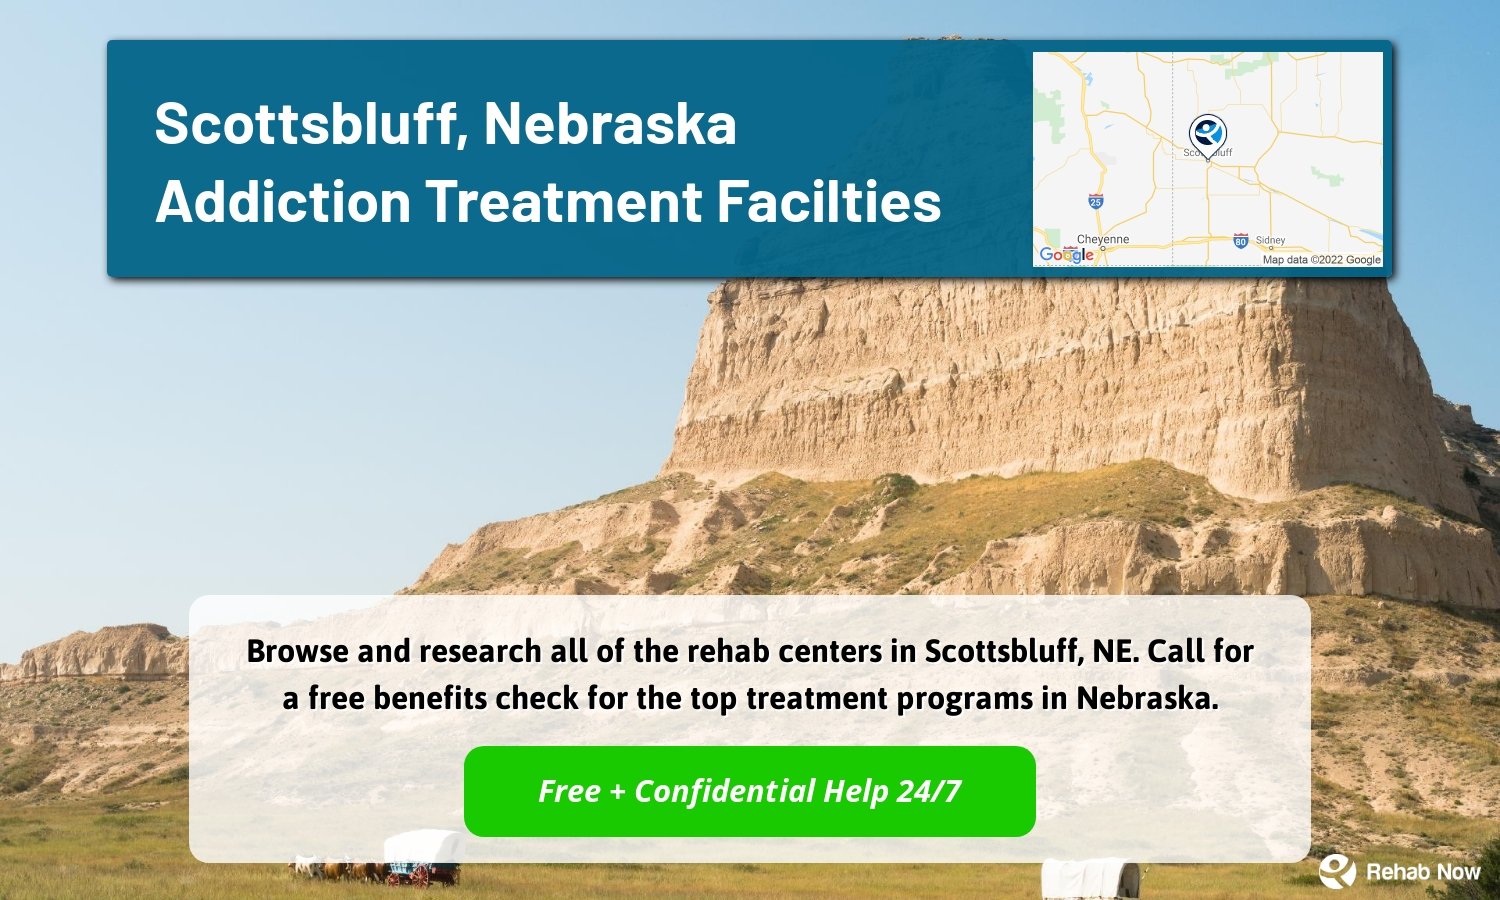 Browse and research all of the rehab centers in Scottsbluff, NE. Call for a free benefits check for the top treatment programs in Nebraska.